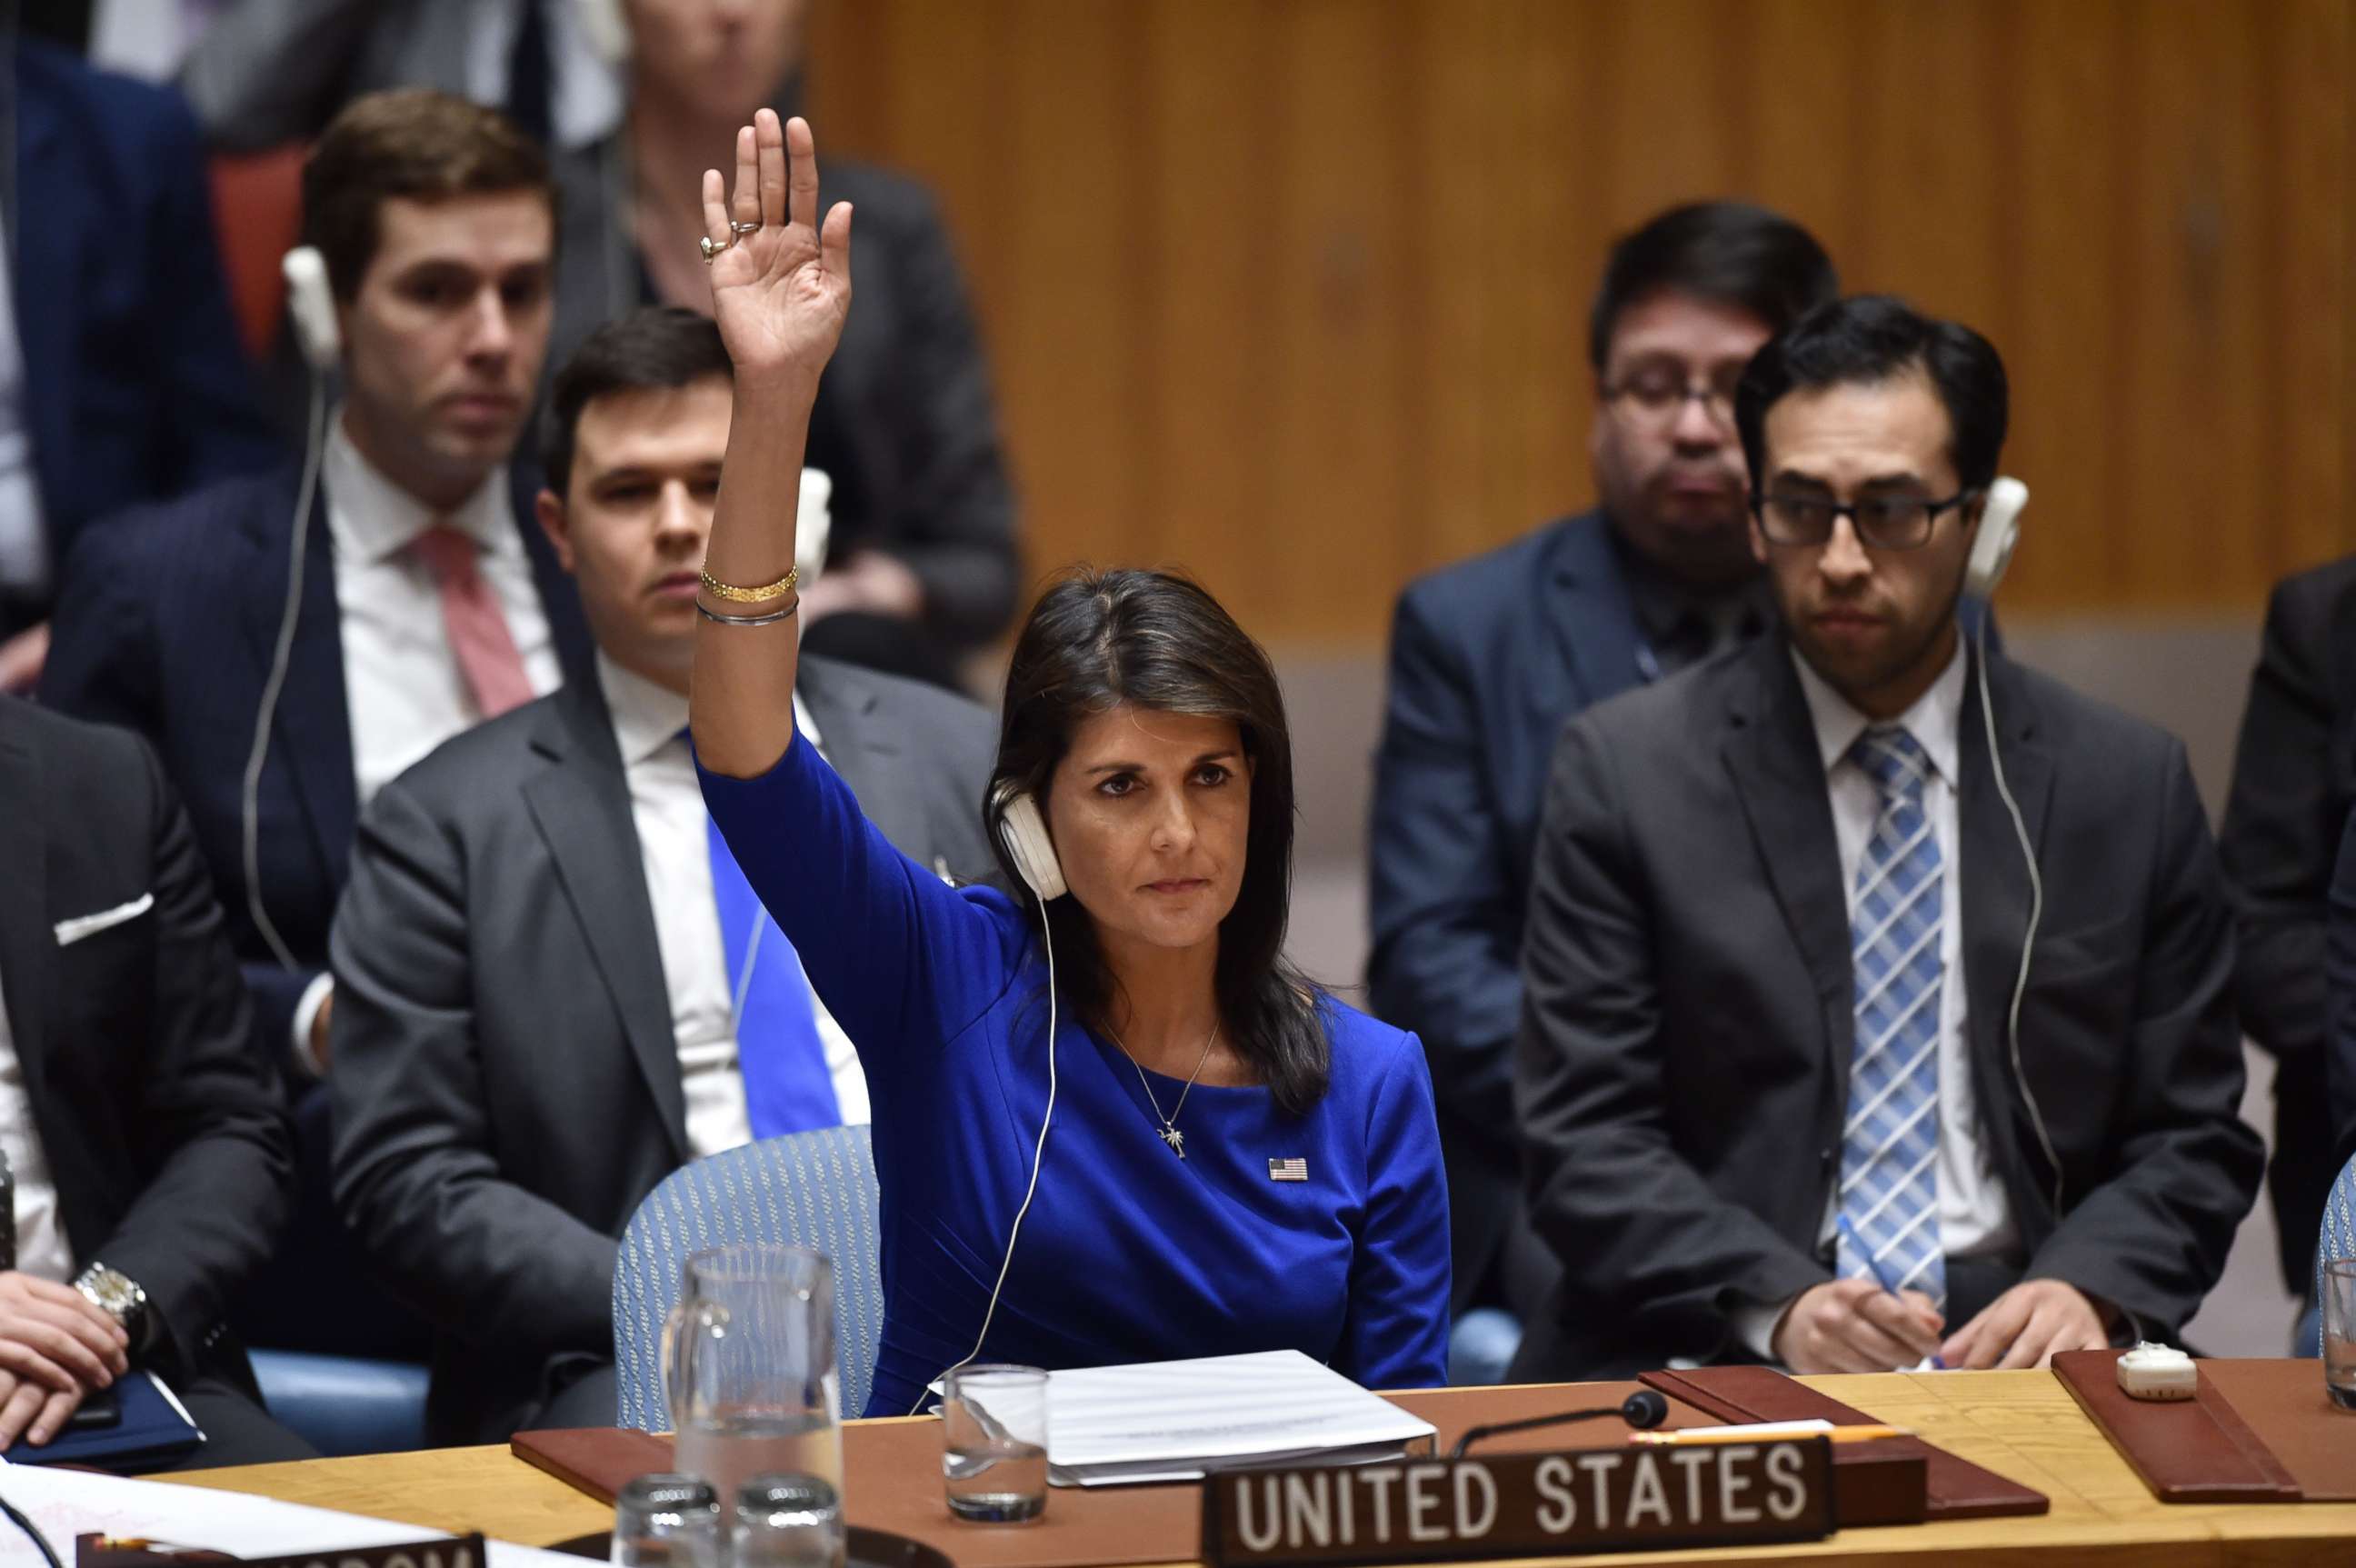 PHOTO: US Ambassador to the UN Nikki Haley votes during a UN Security Council meeting on the situation in Syria, at the United Nations Headquarters in New York, April 14, 2018.

